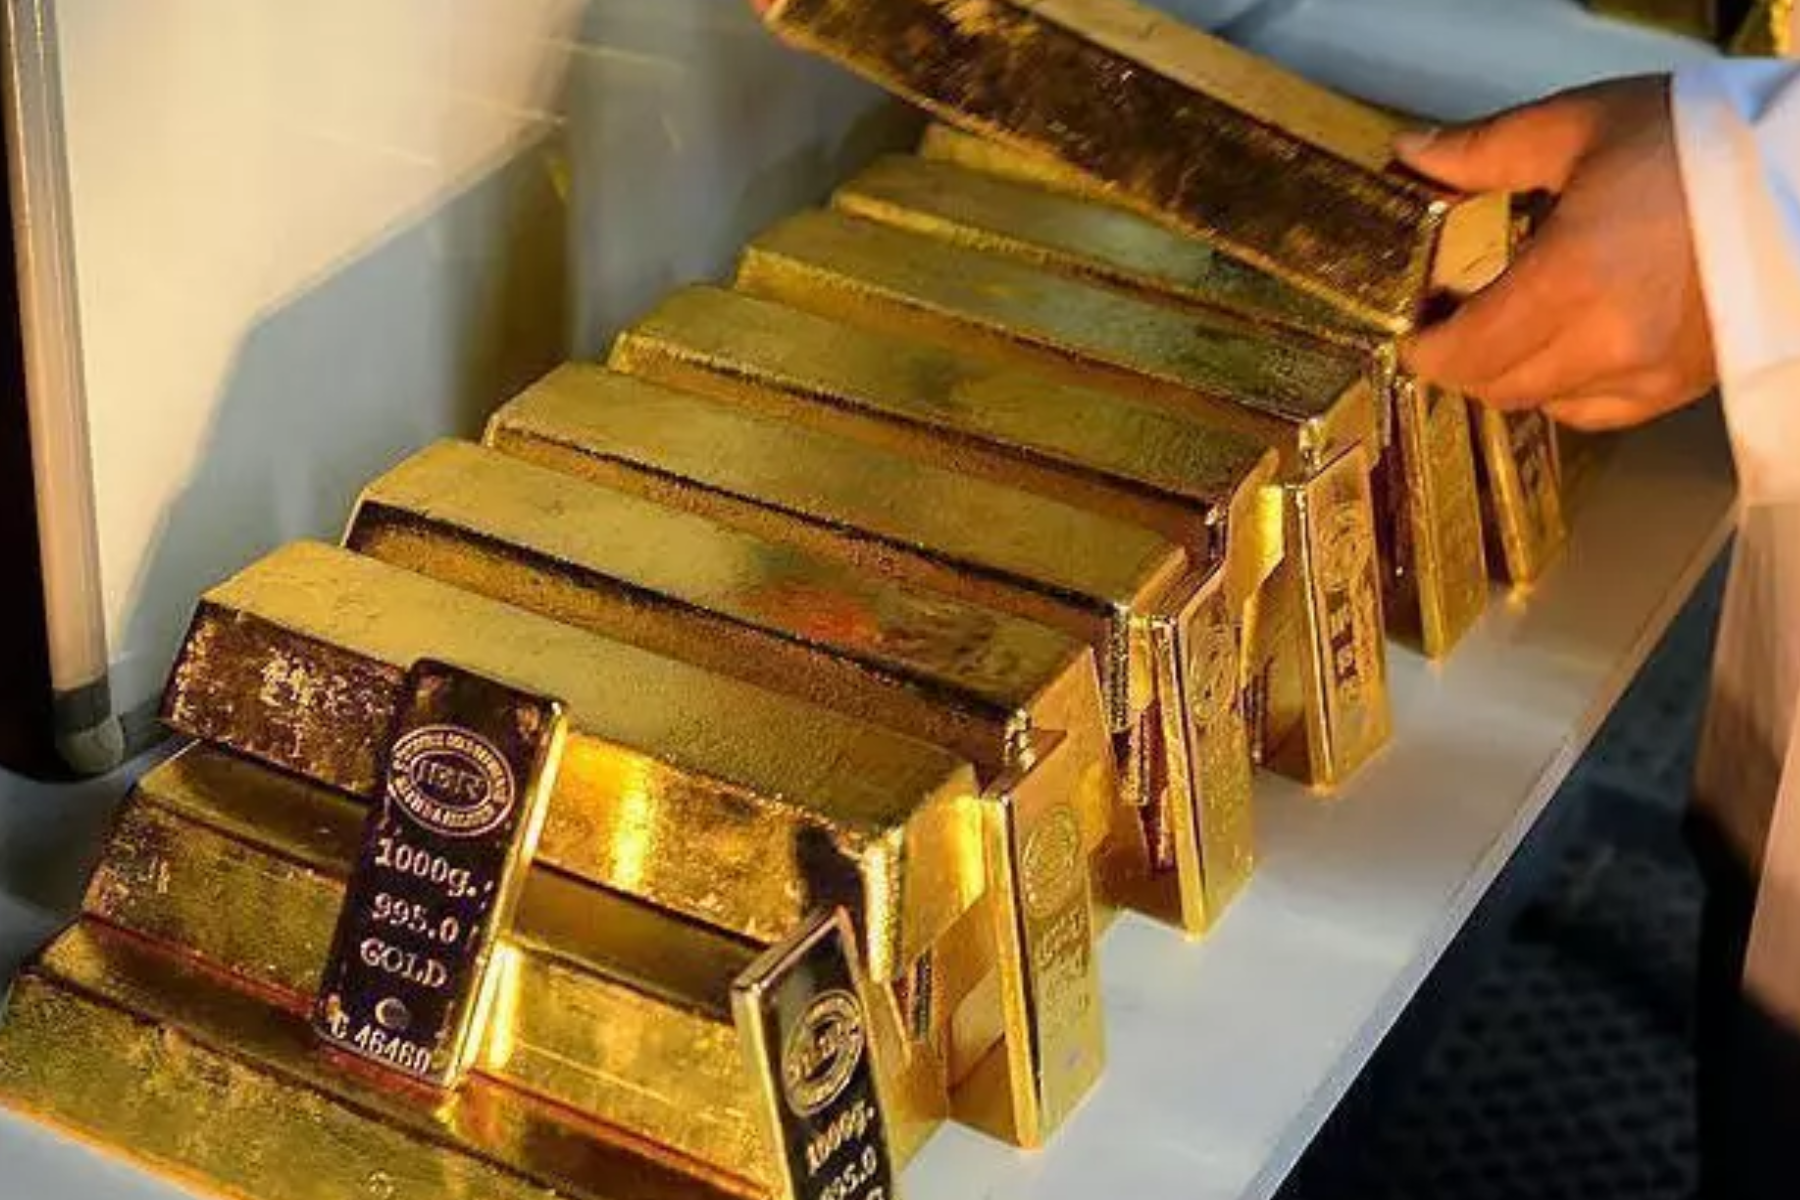 Gold bars at the table